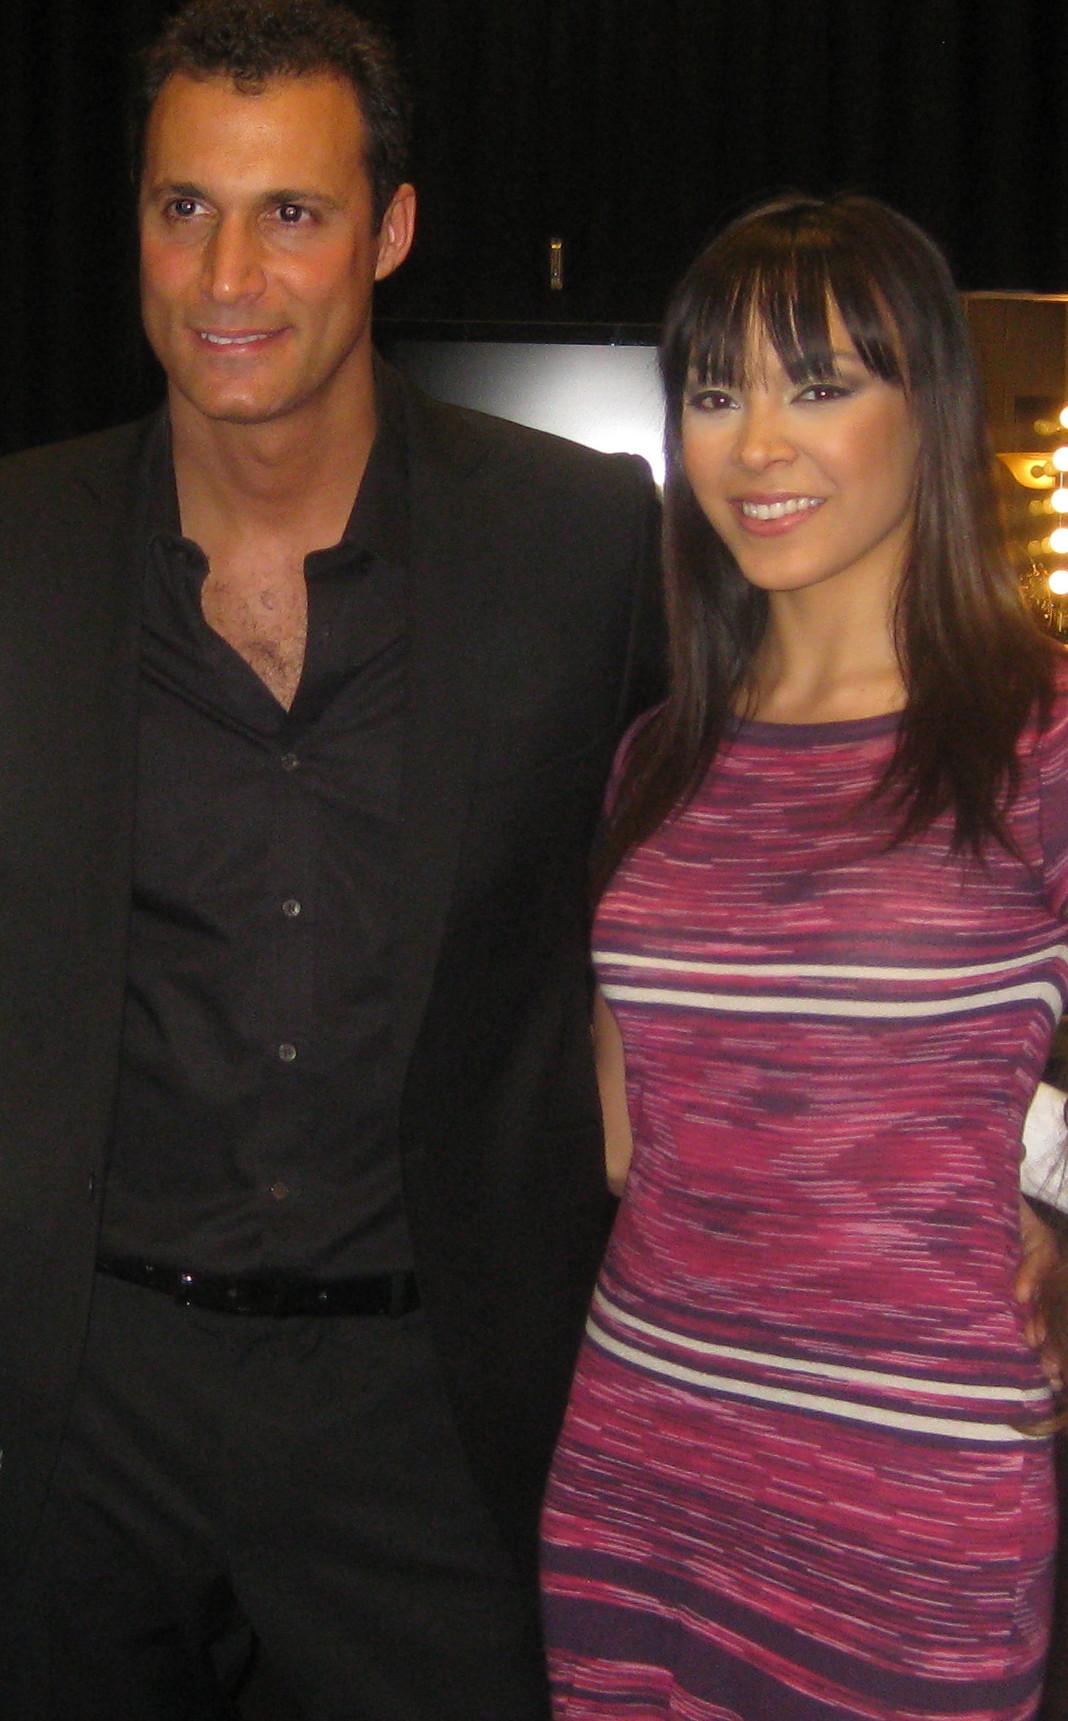 Backstage after runway show with host Nigel Barker, fashion photographer & judge on 